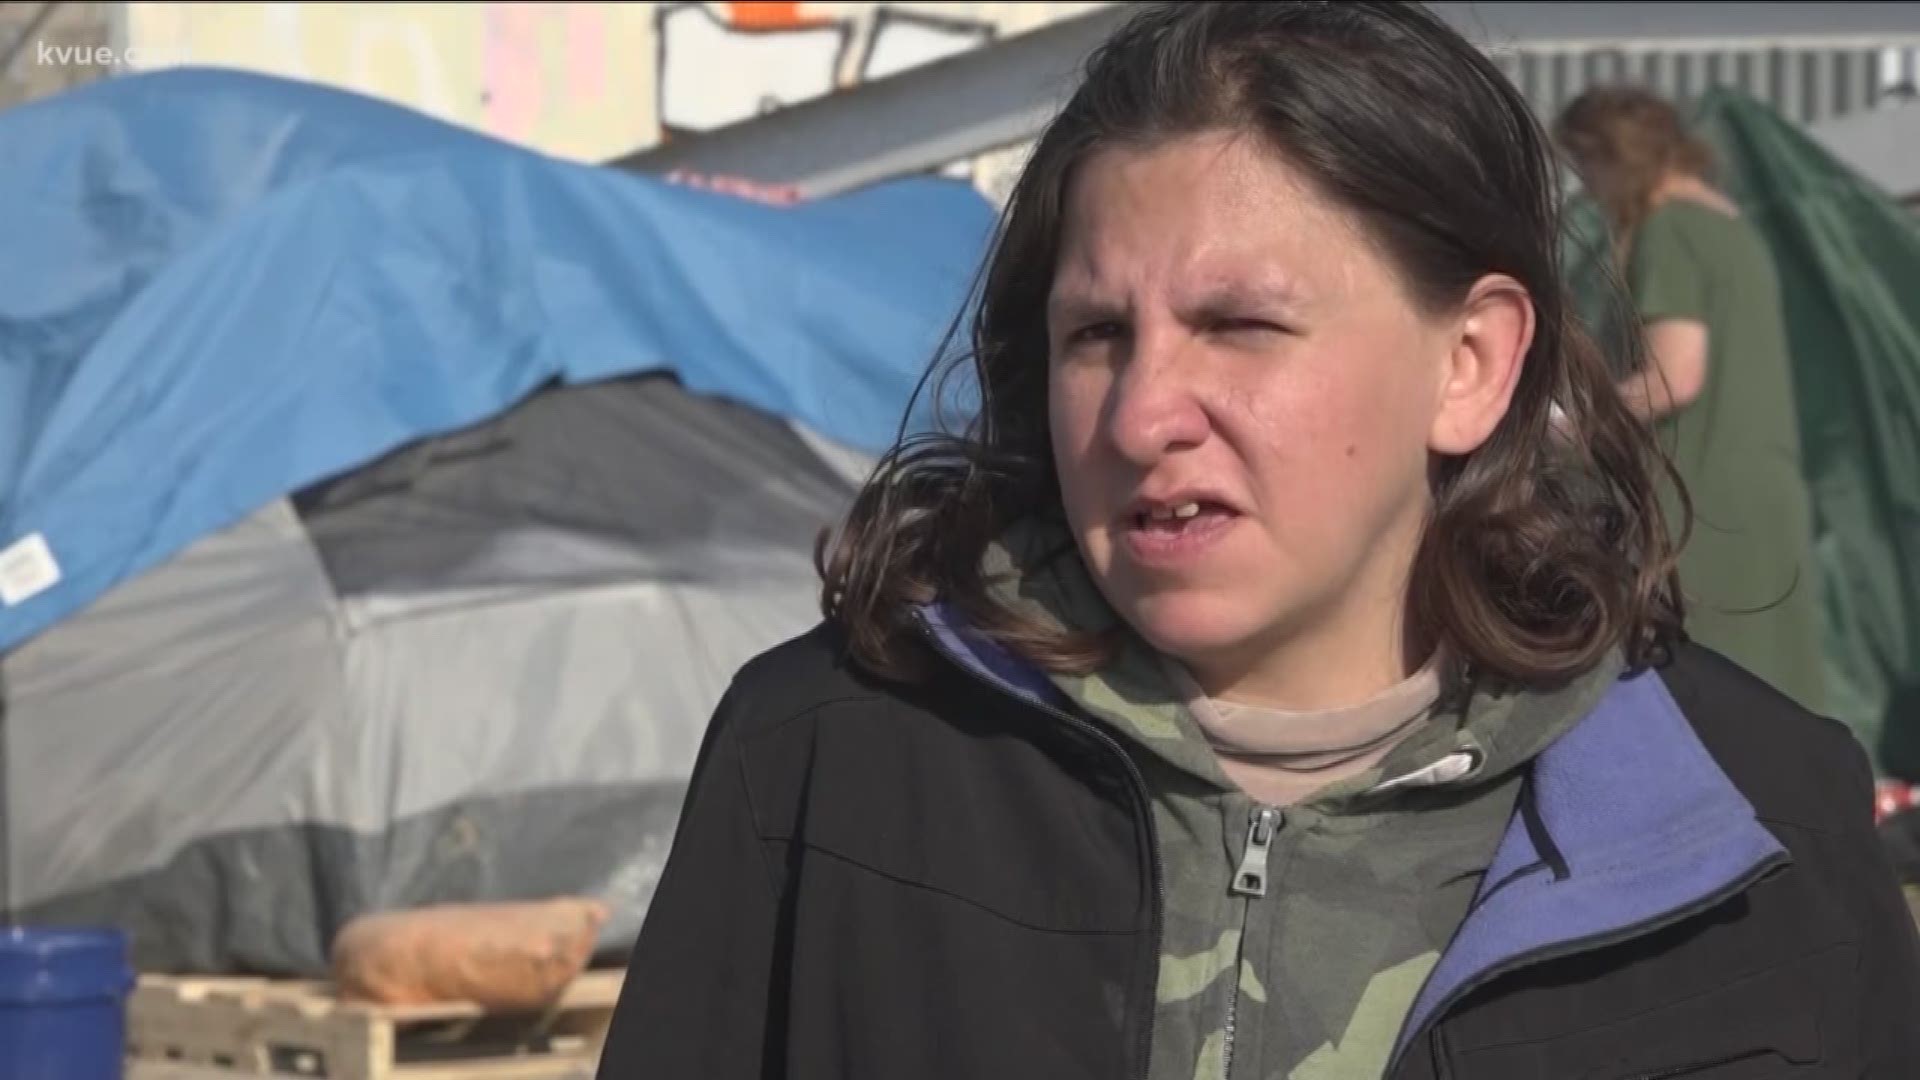 Those living at a southeast Austin homeless camp have an offer for the governor.